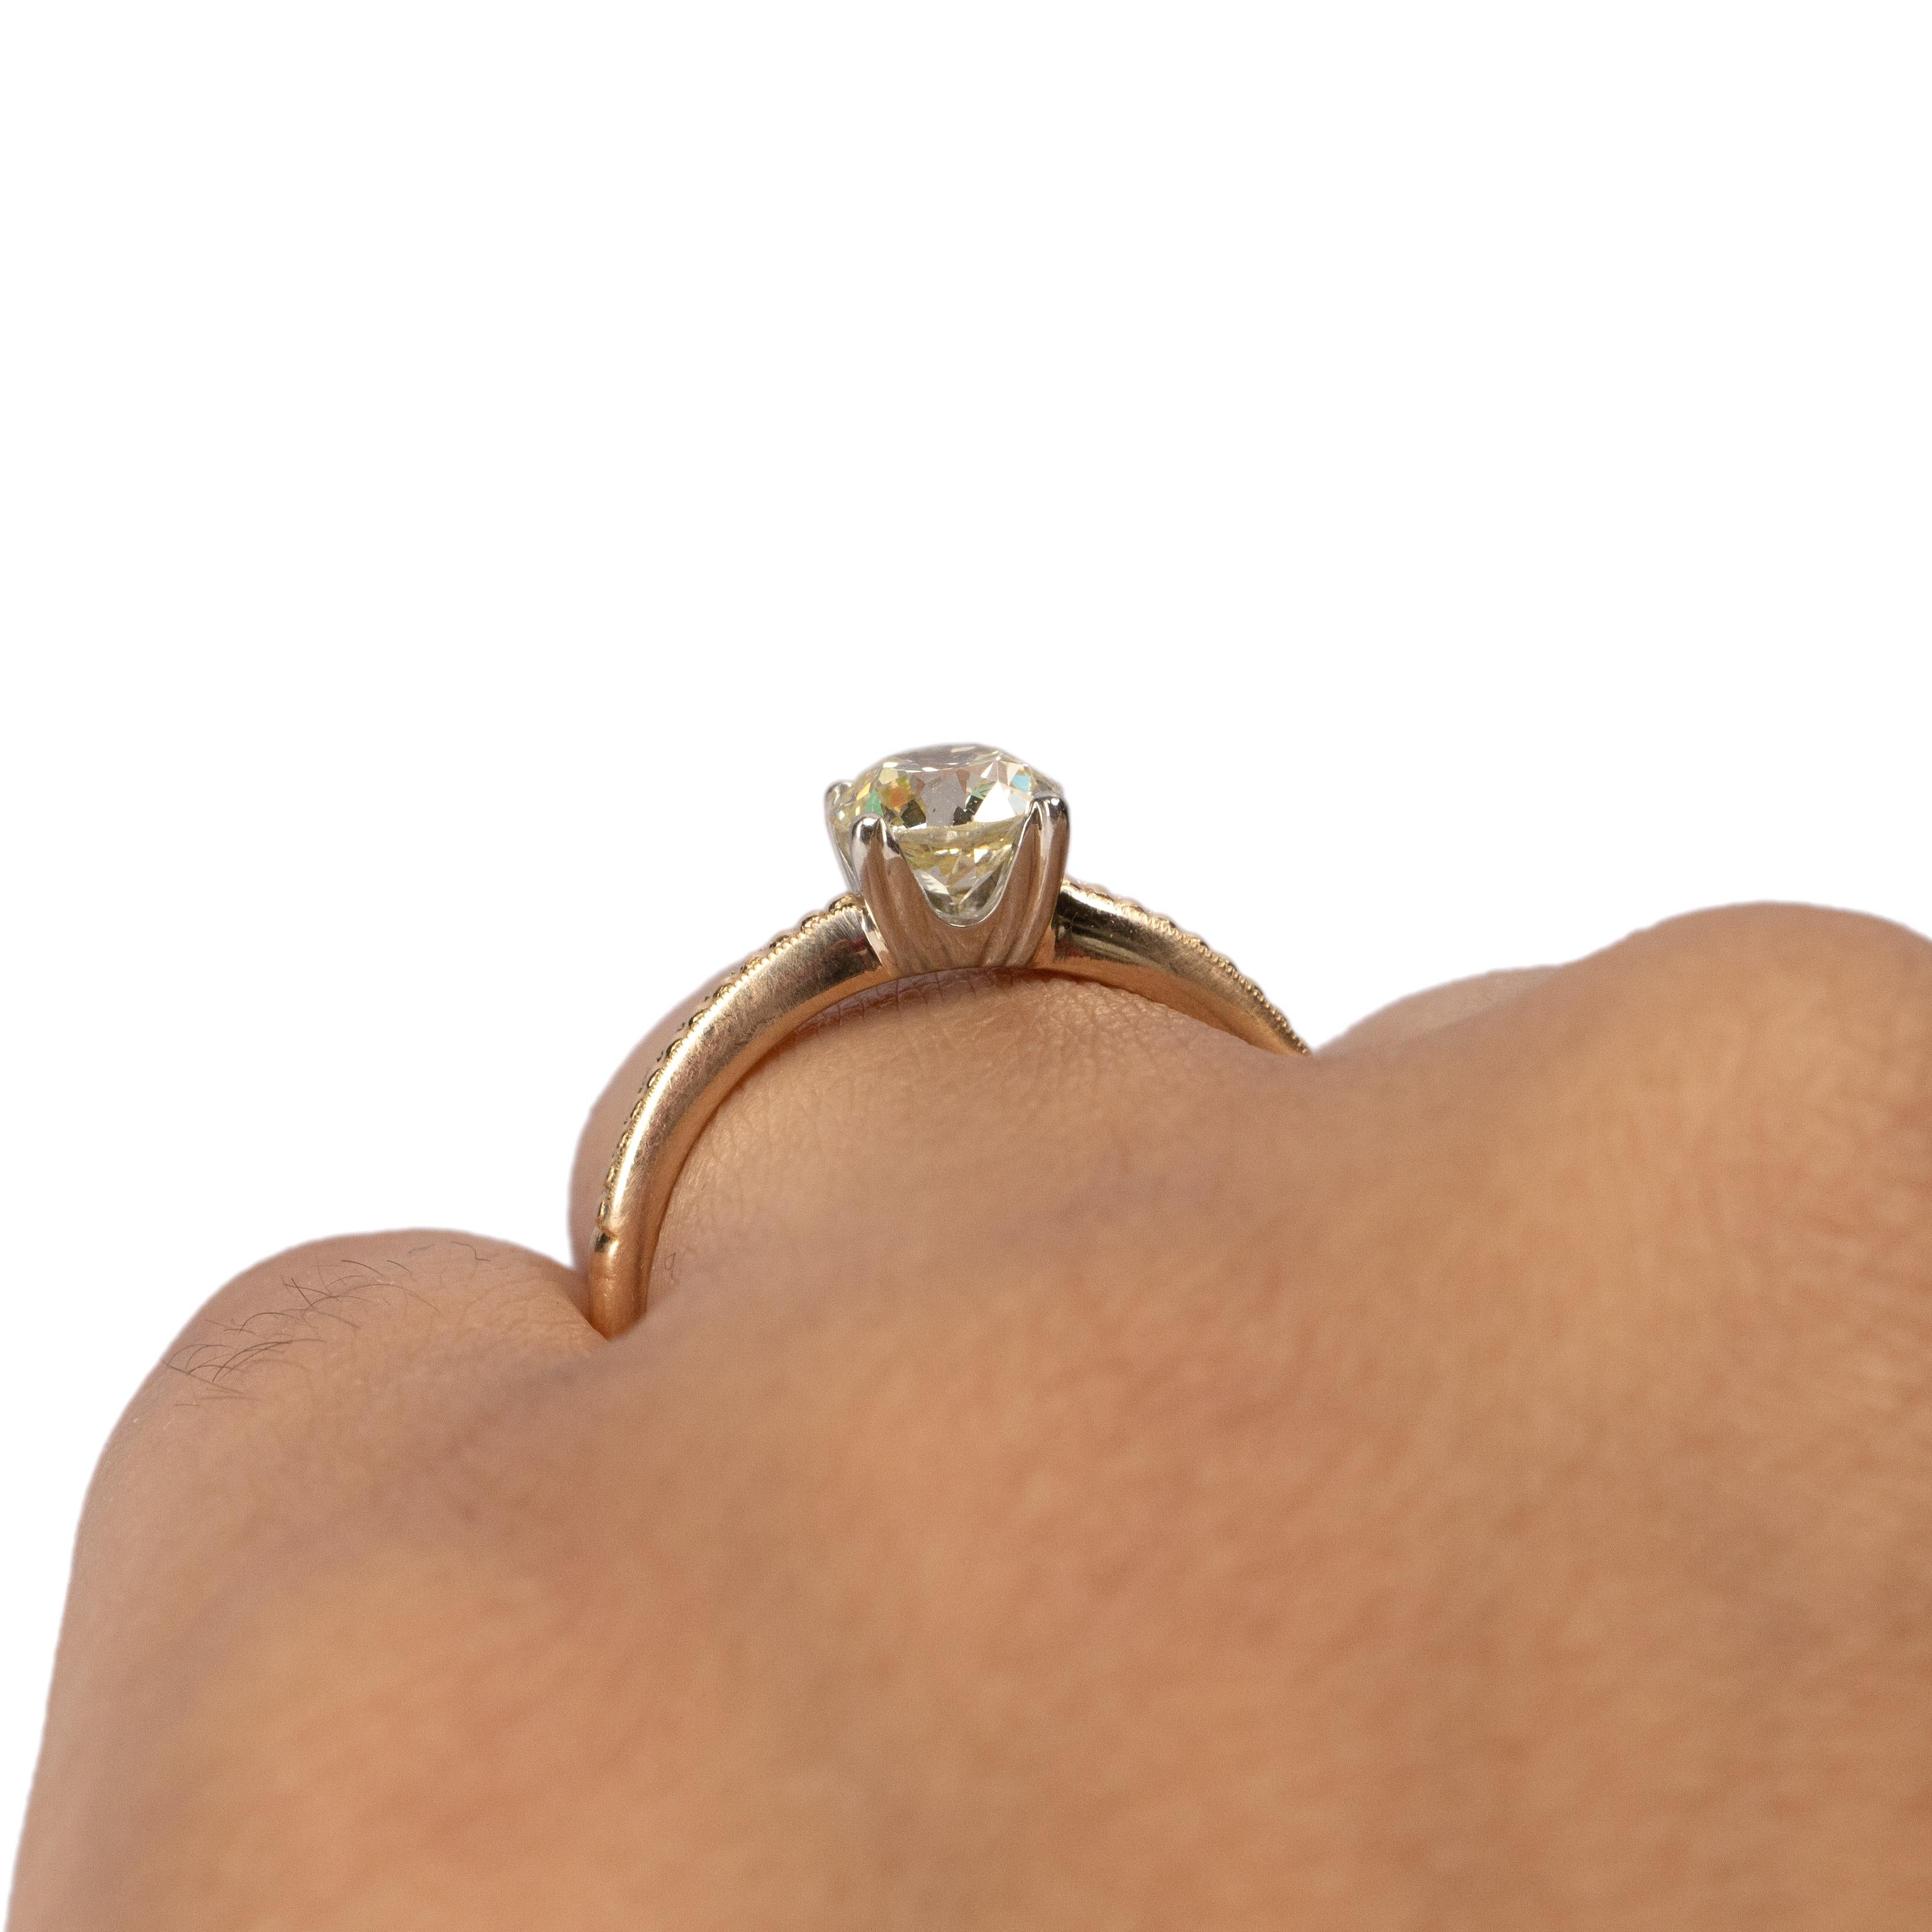 Women's or Men's Solitaire Ring with Simple Carved Bubble Design and a .85 Carat Center